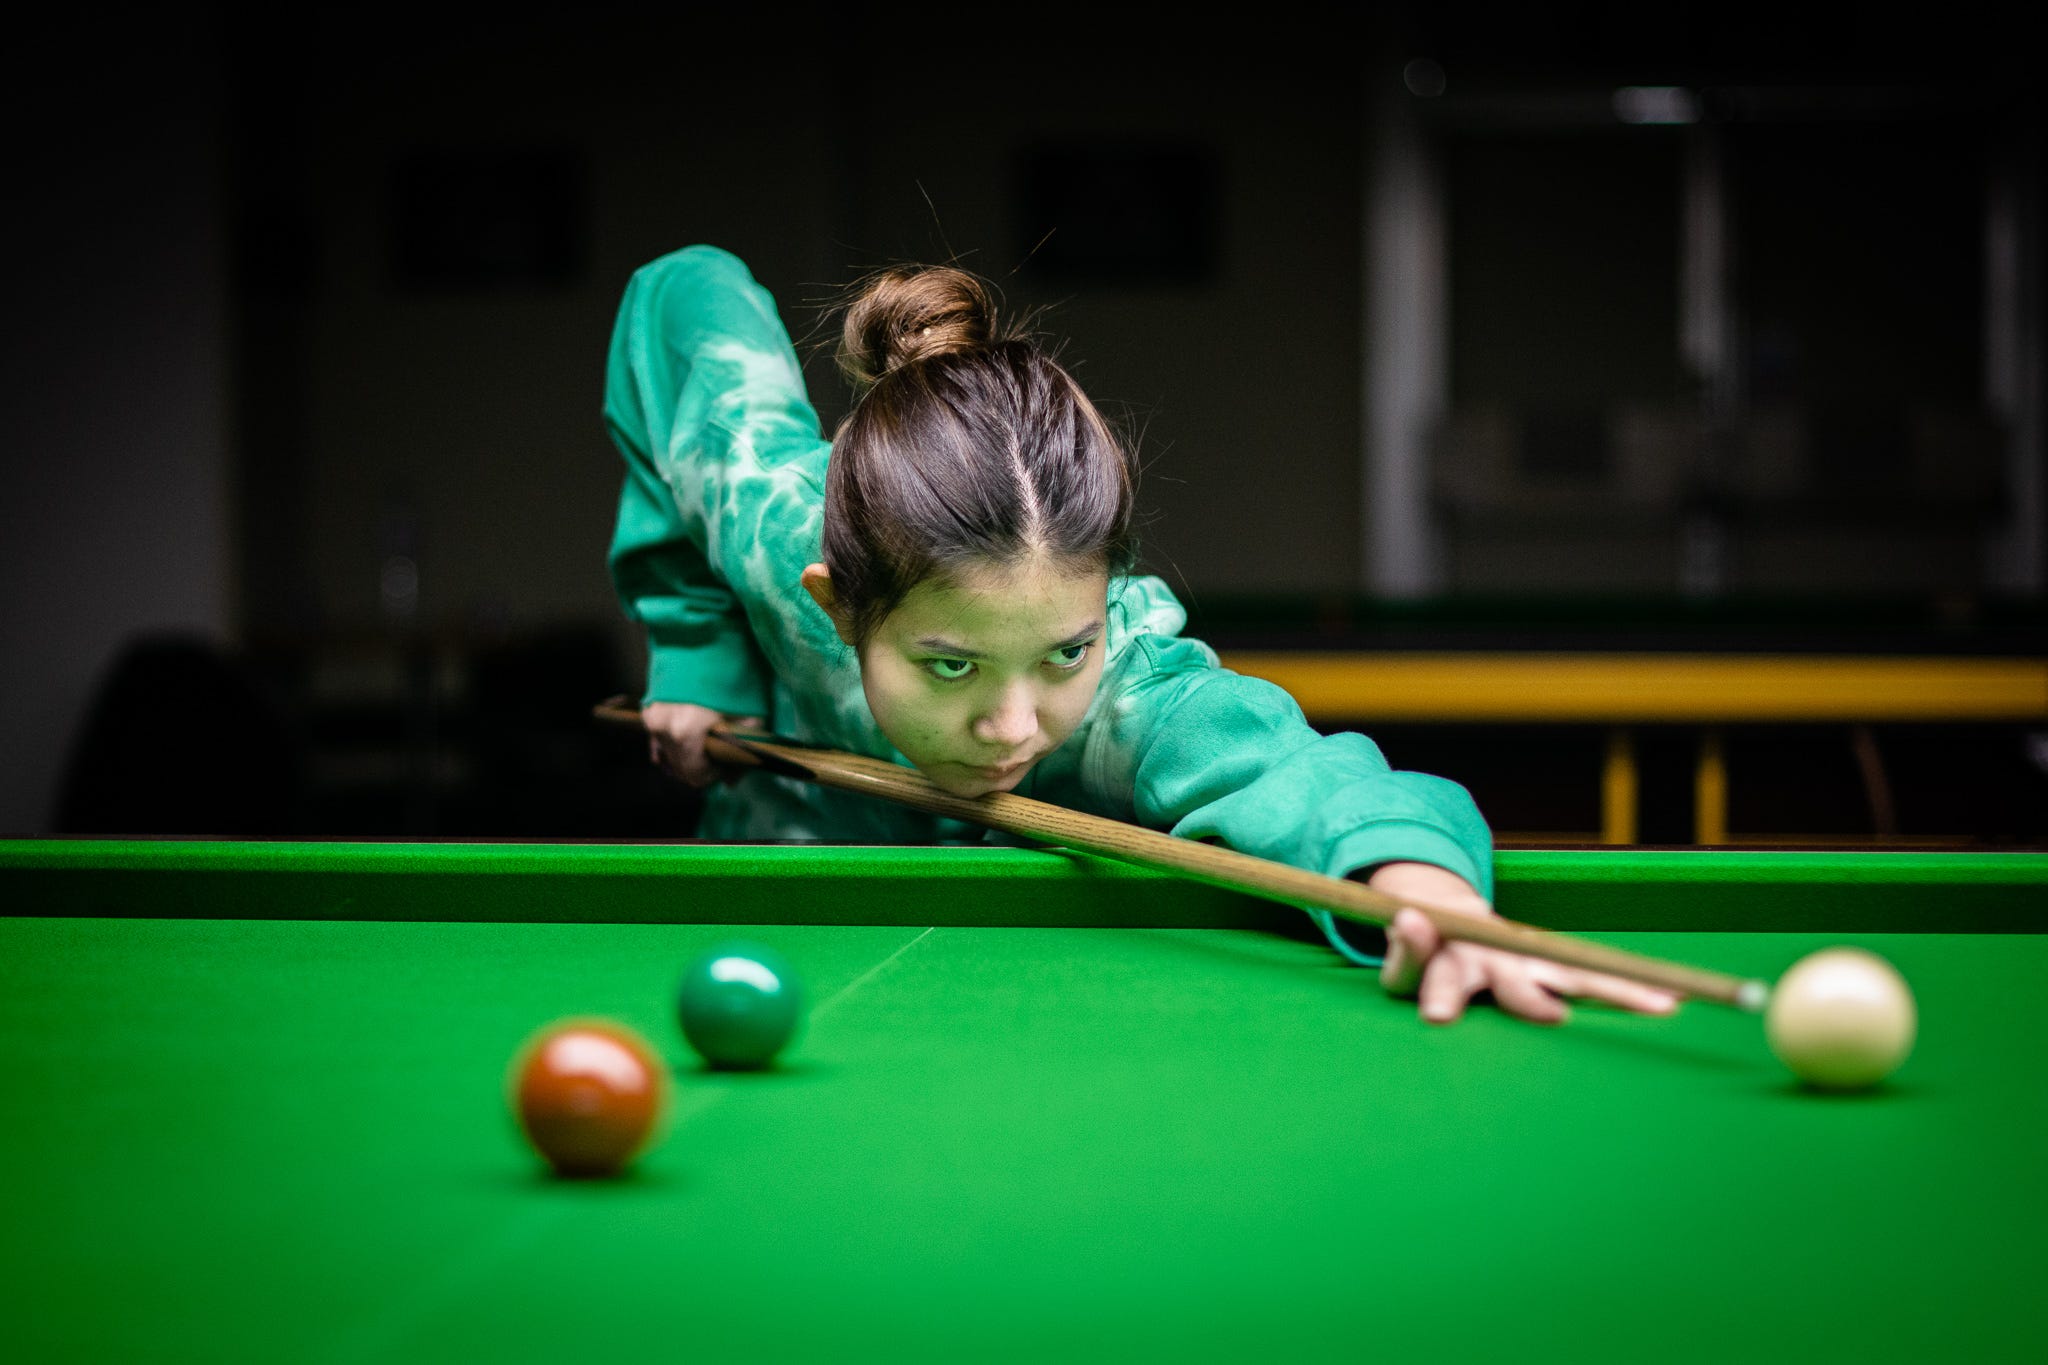 In half-lit rooms, Sheffield moulds the snooker stars of the future